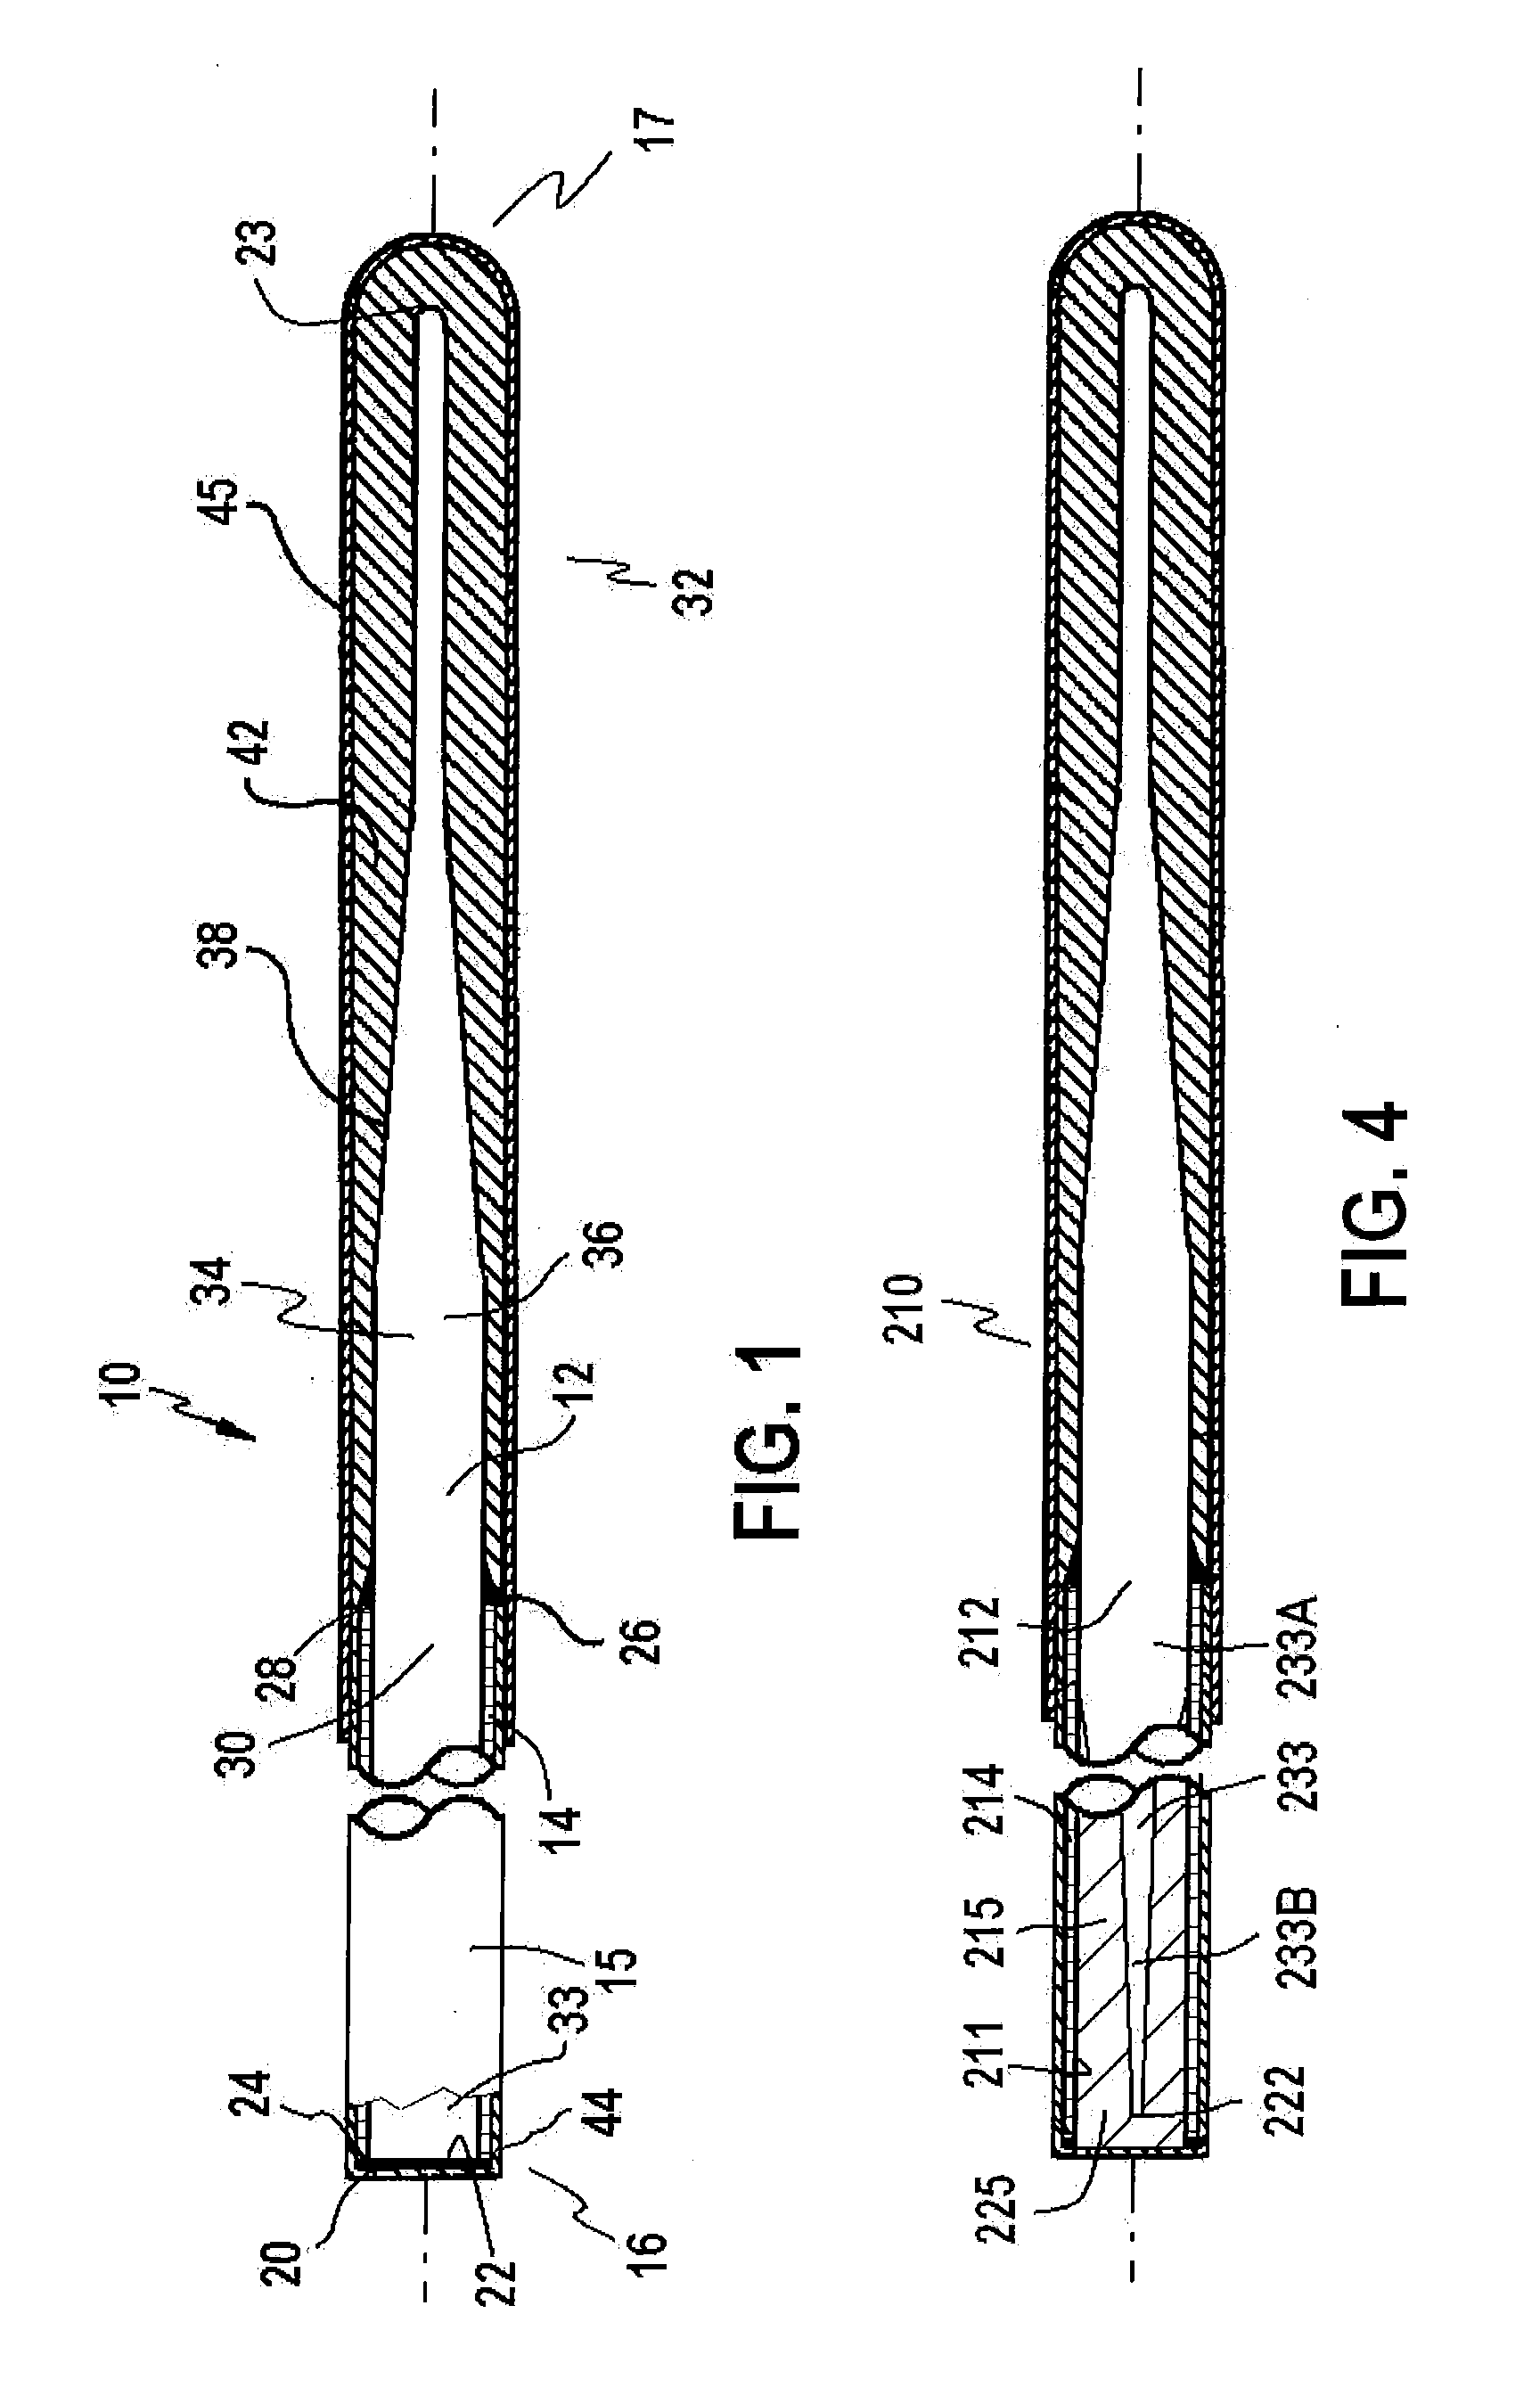 Wire guide with cannula